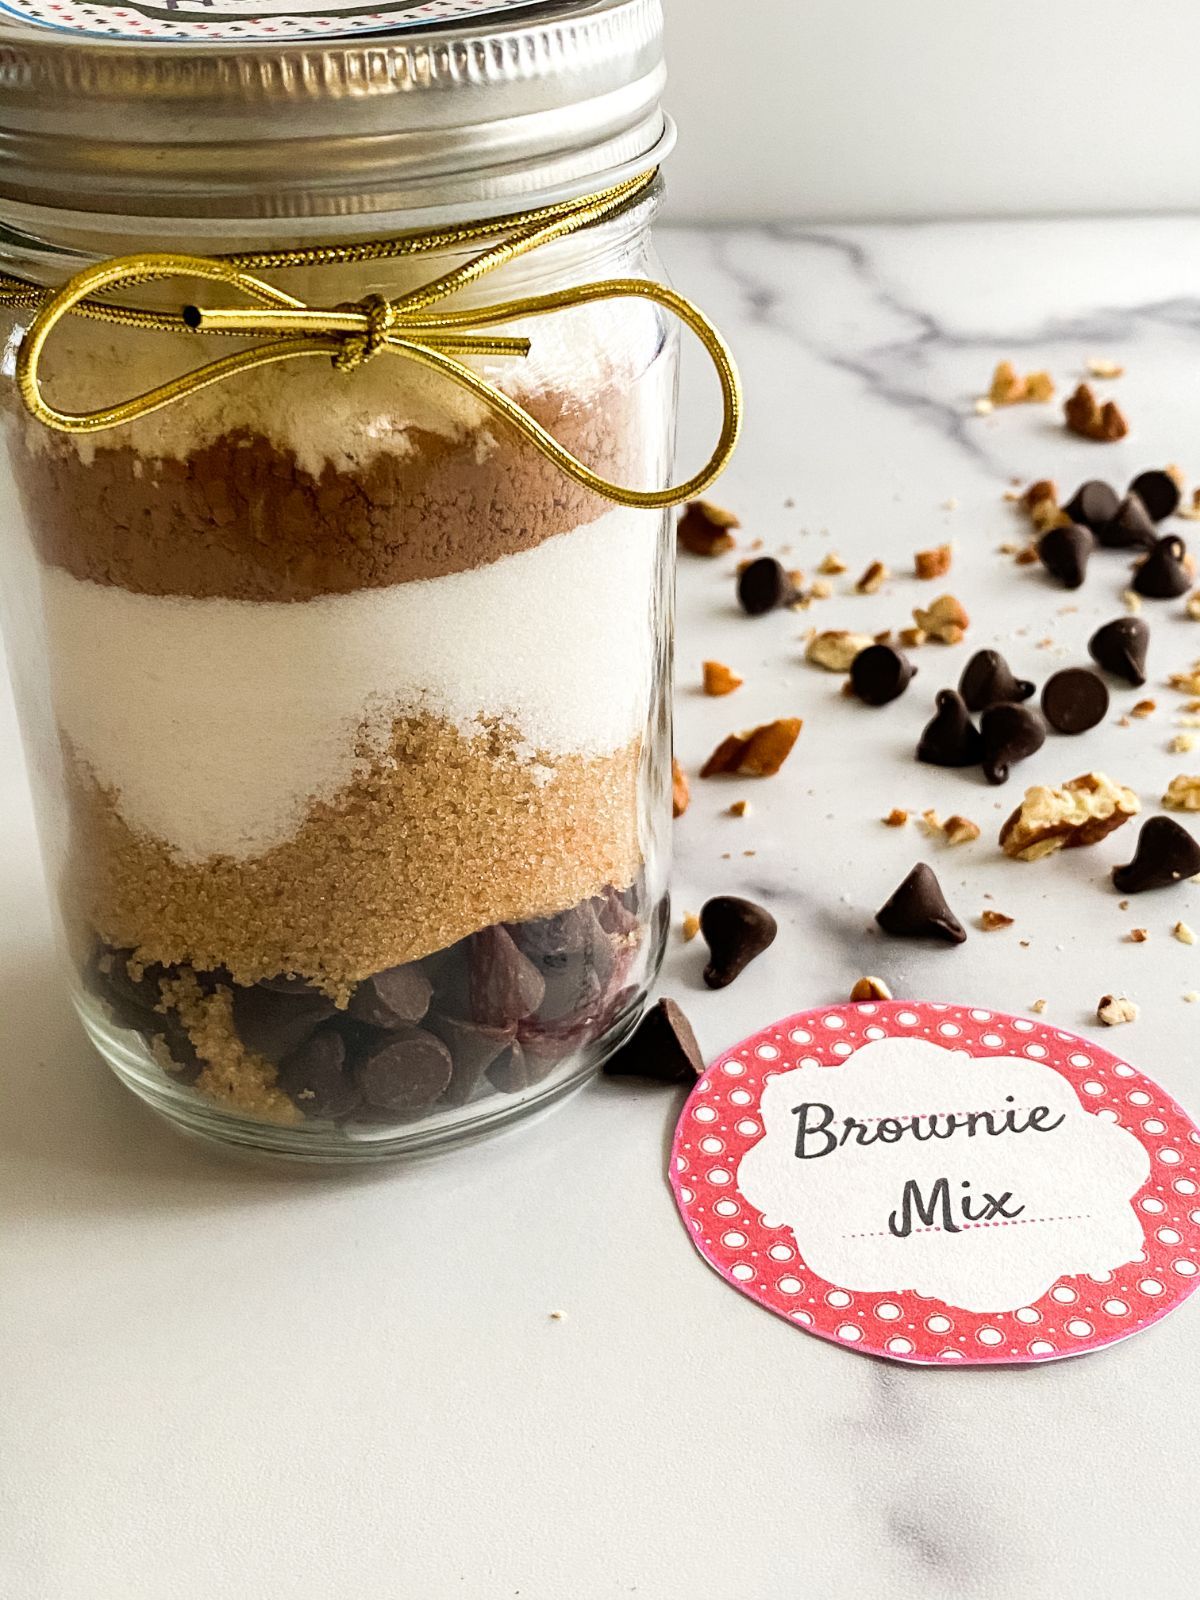 An image of the Brownie Mix in a Jar showcasing its layers and a circular tag beside it saying "Brownie Mix"